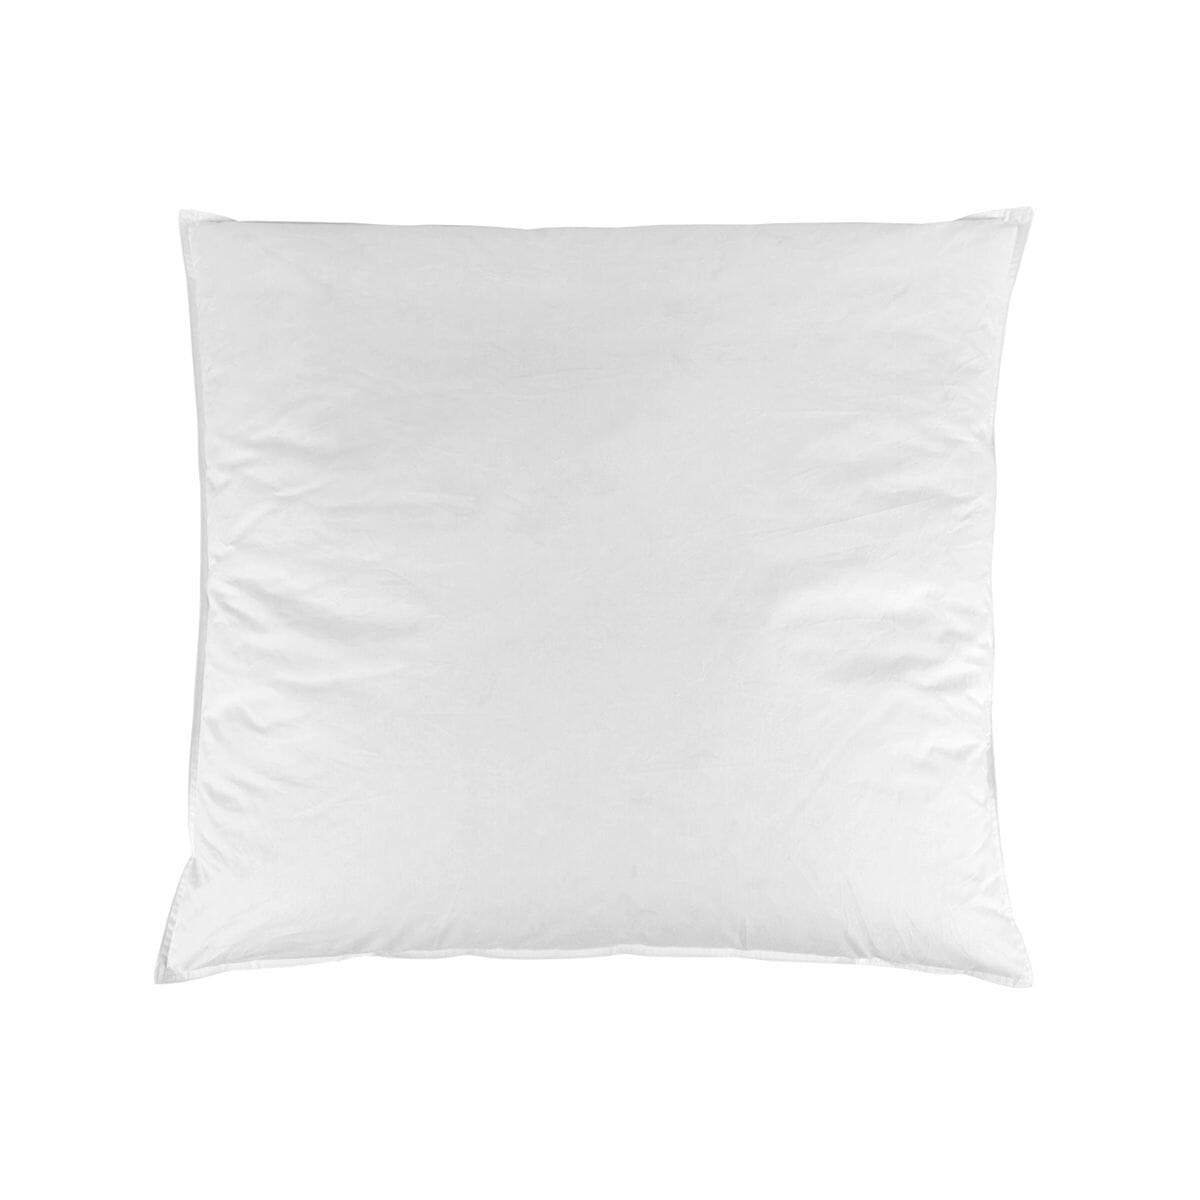 View Waterproof Support Pillow Square Waterproof Pillow 65 x 65 cm information